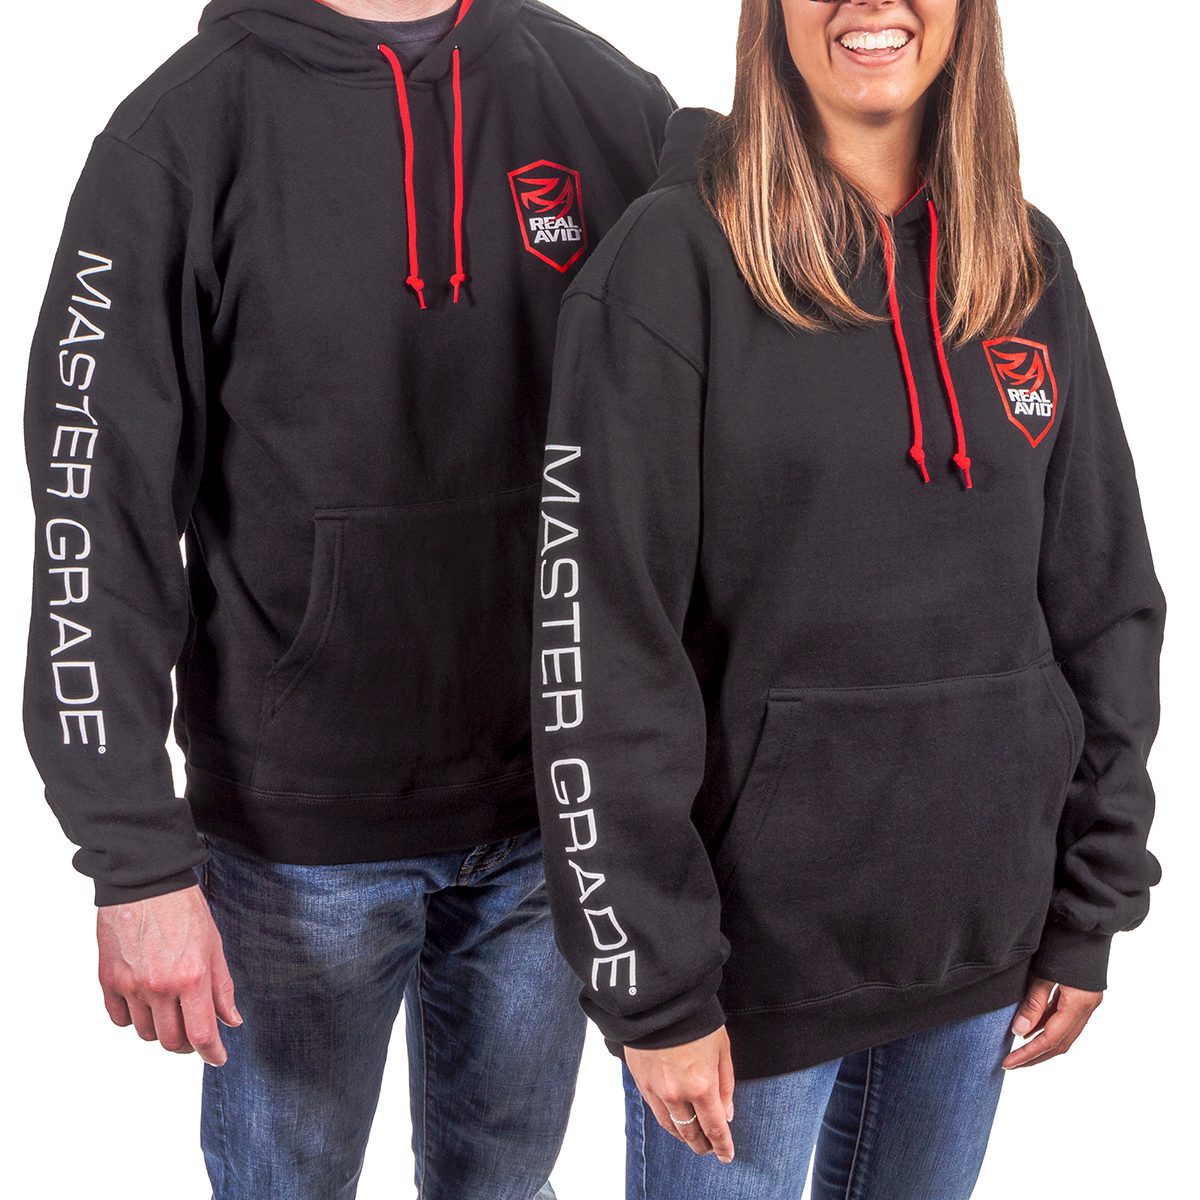 a man and woman wearing black hoodies